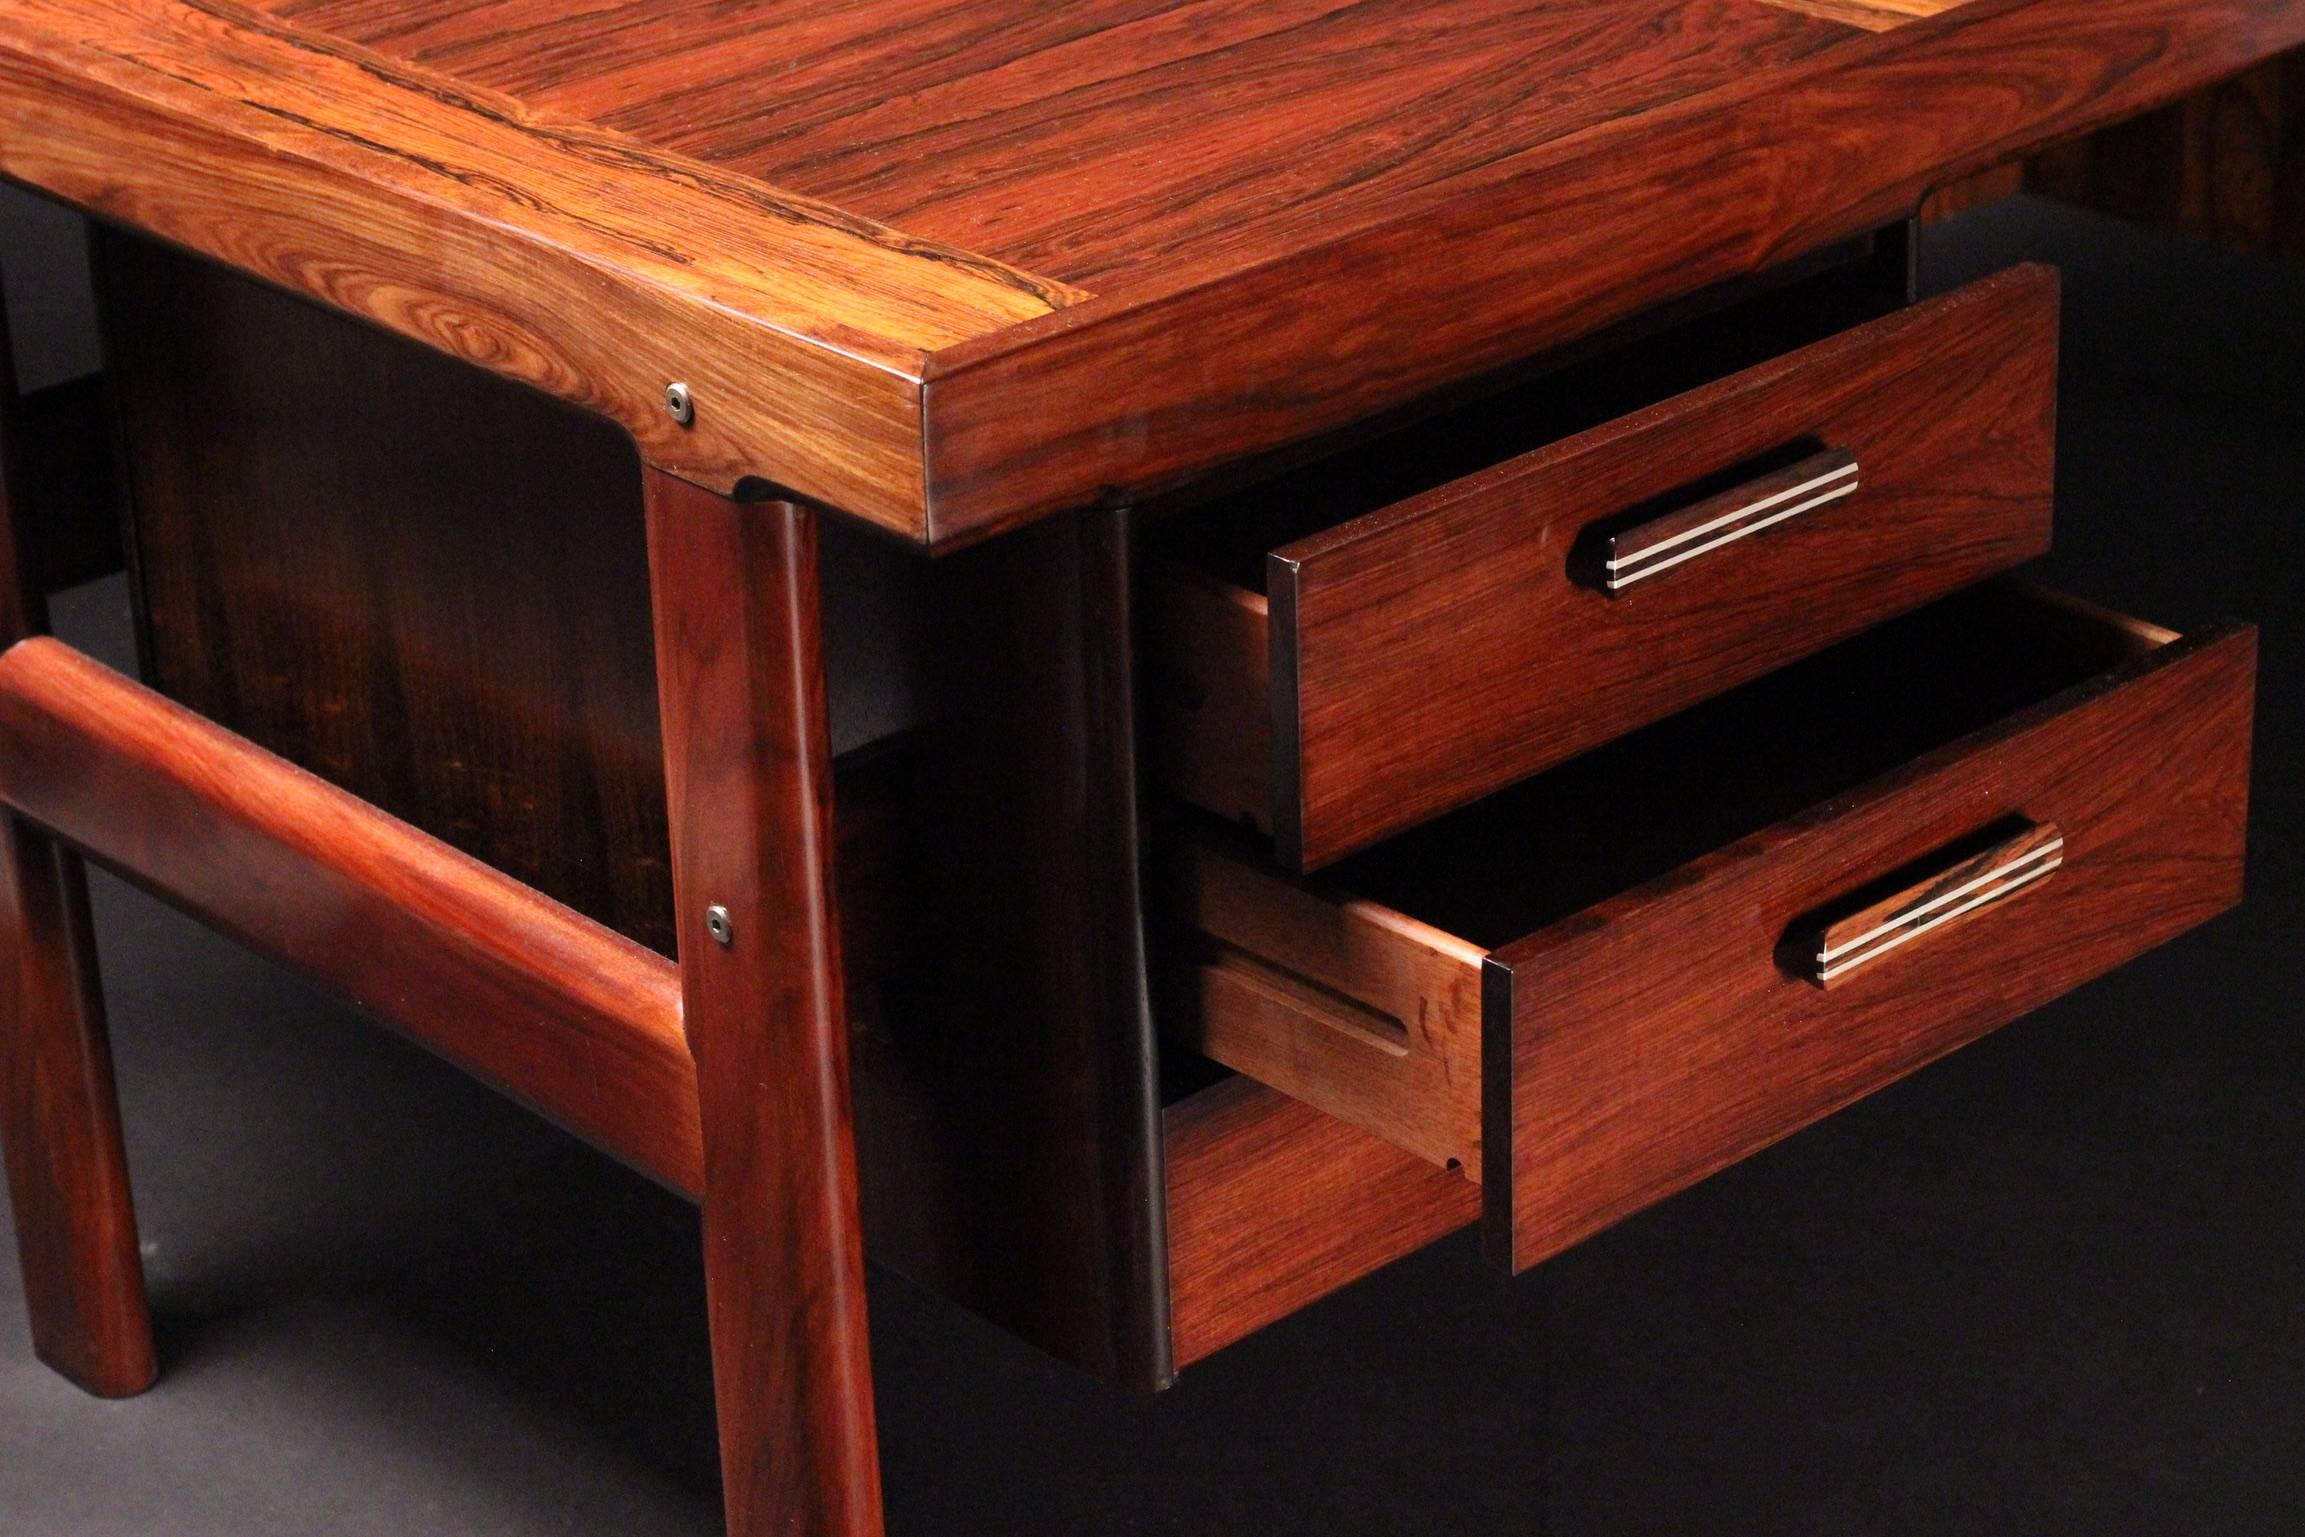 Made from Brazilian rosewood this highly desirable statement piece conveys stature and quality. With a wonderful grain pattern it would likely become the centrepiece of any study or office.

 